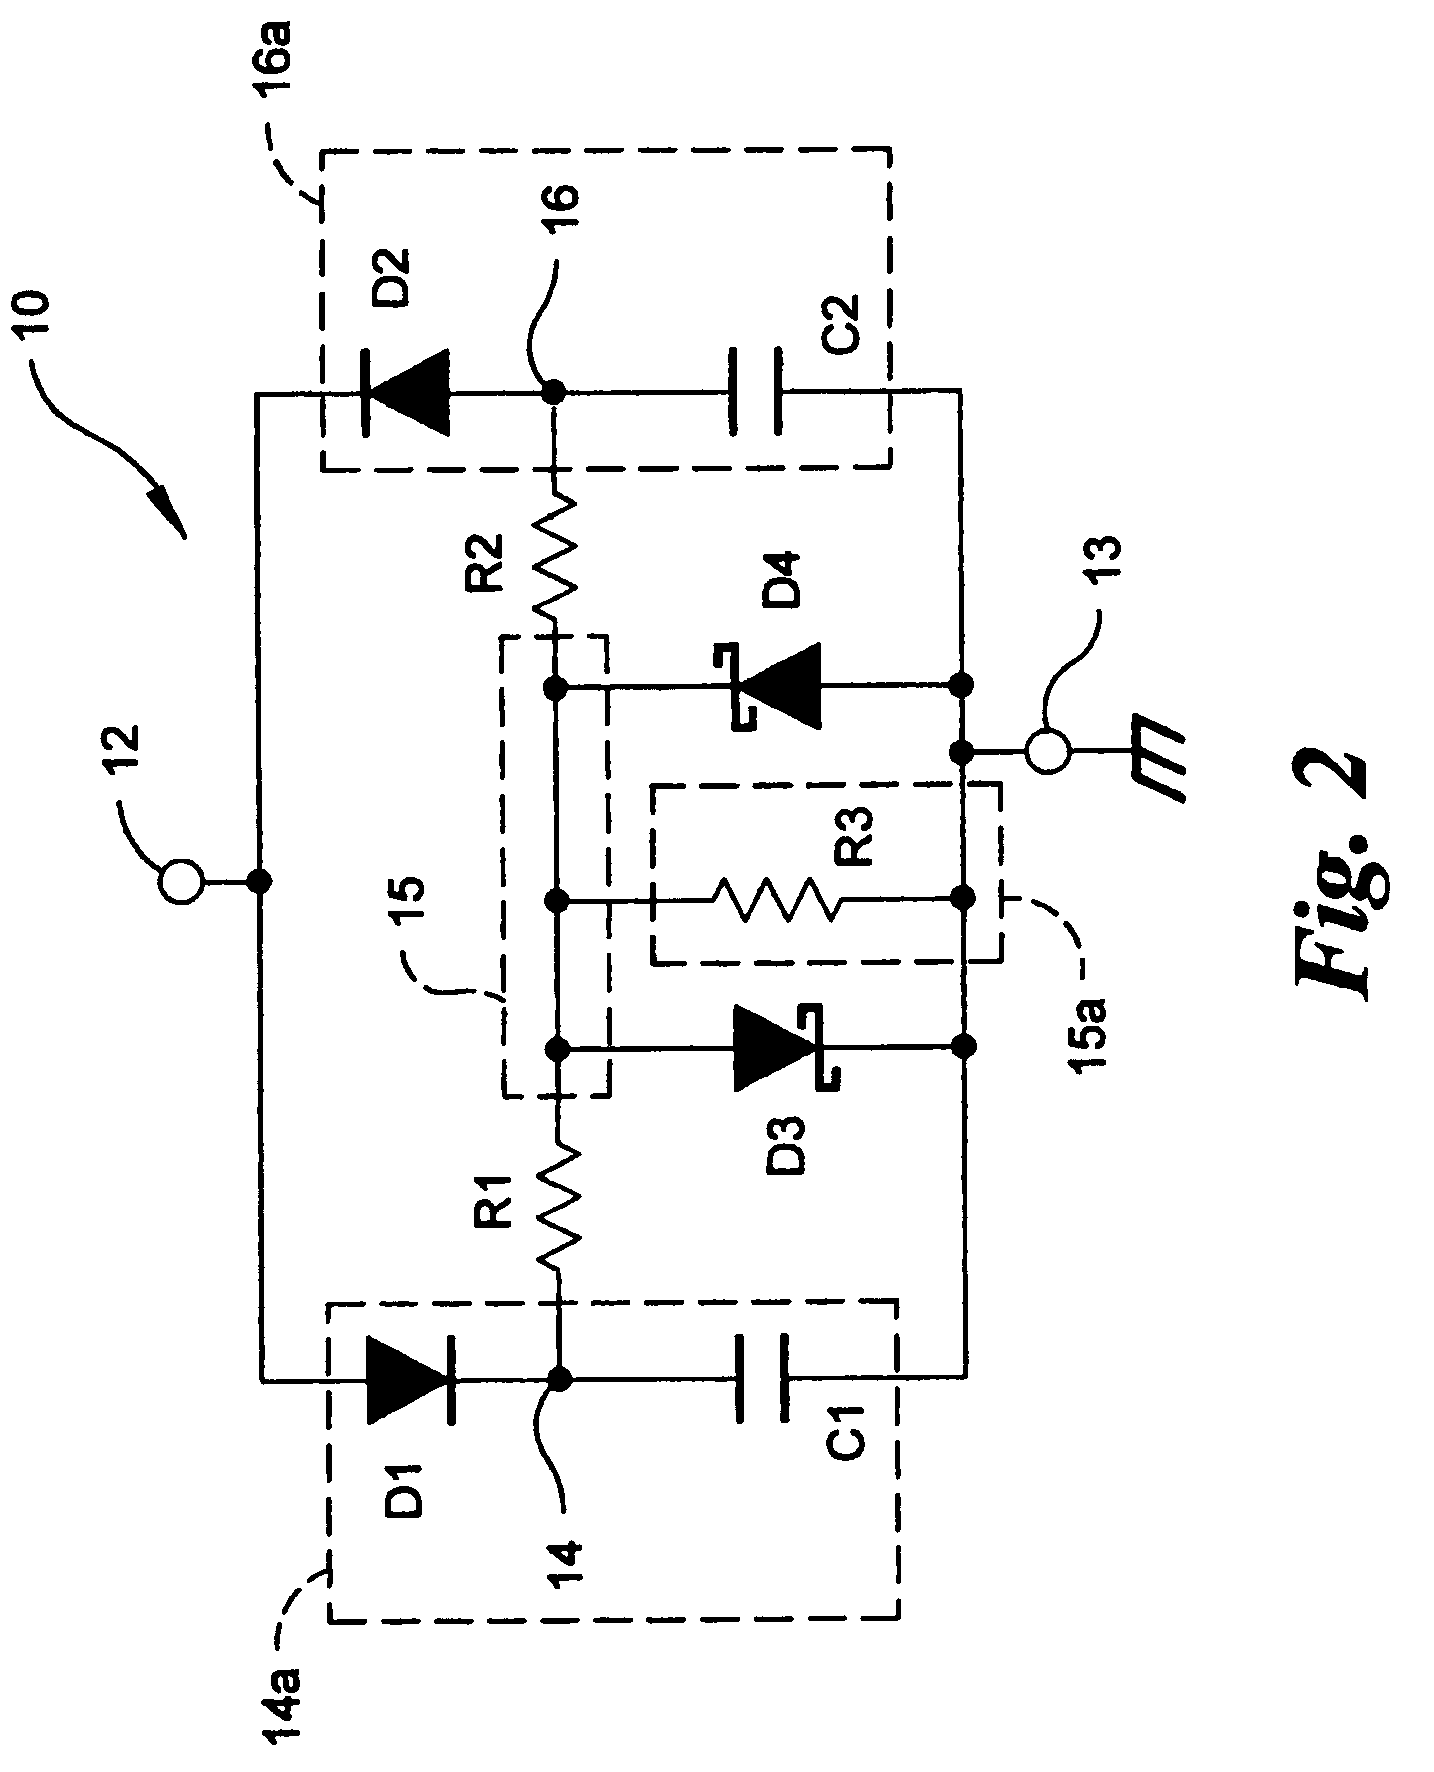 Alternating current monitor for an ionizer power supply